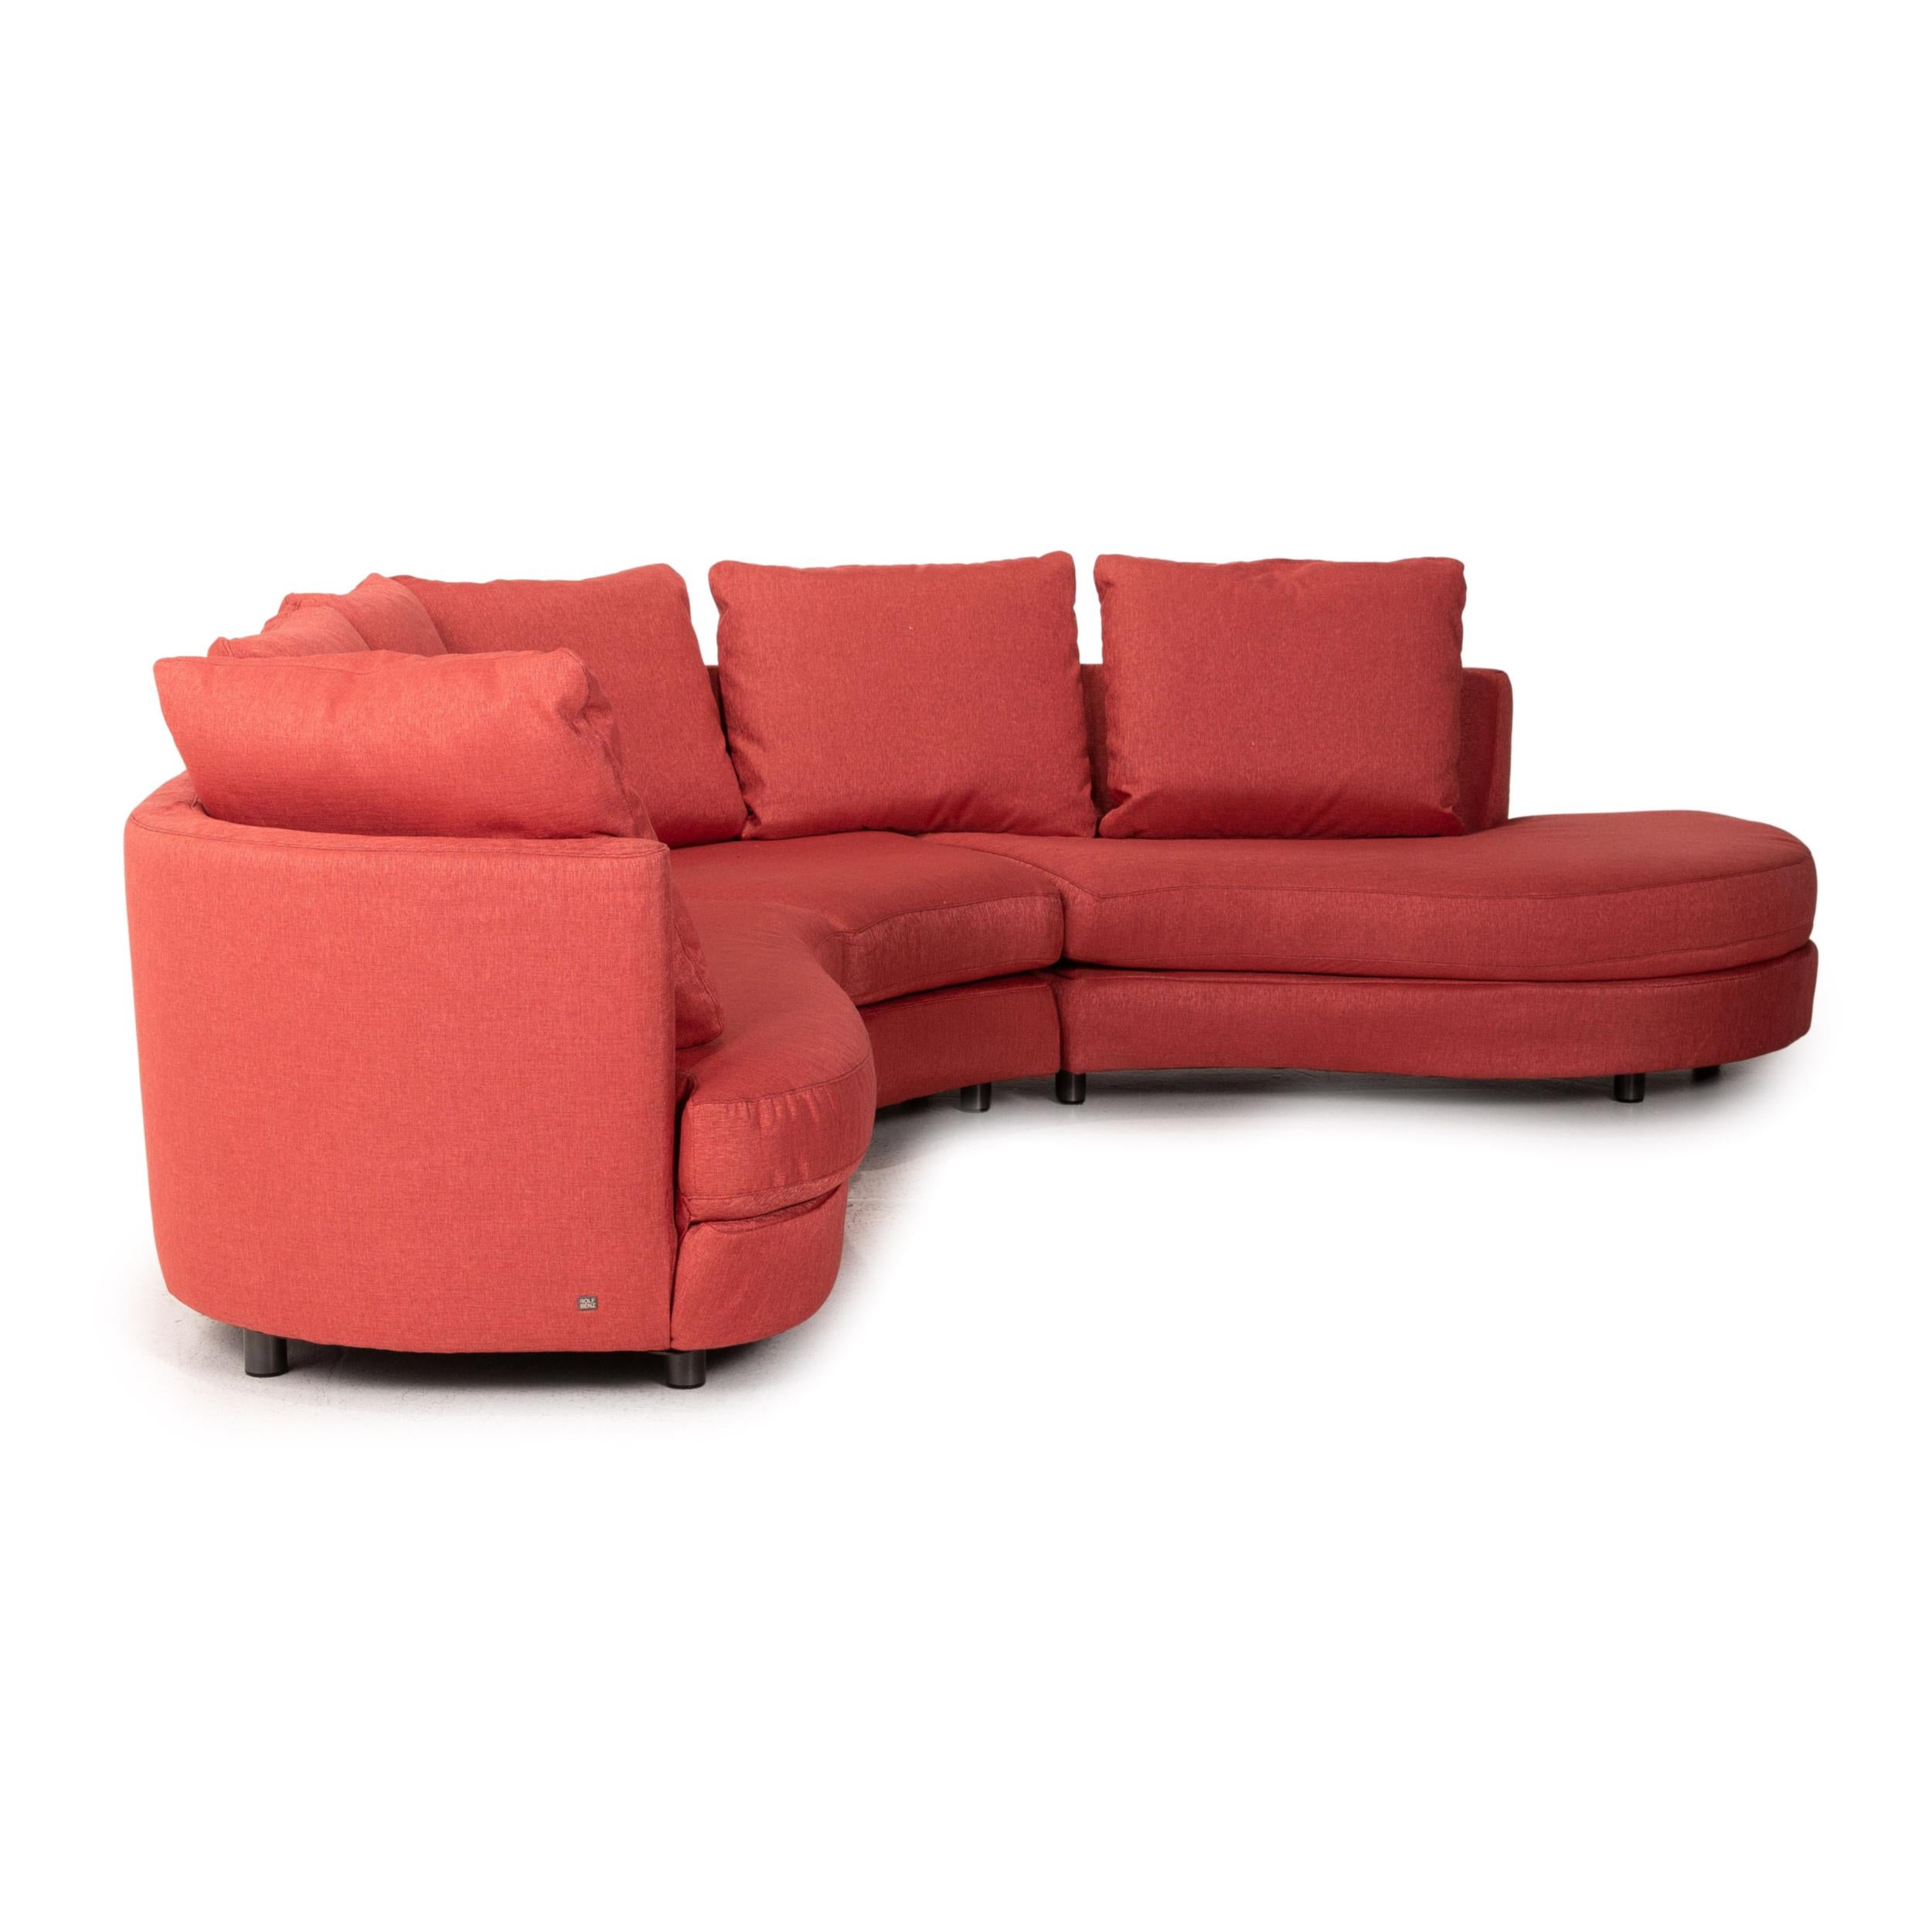 Rolf Benz Fabric Corner Sofa Red Sofa Couch For Sale 1